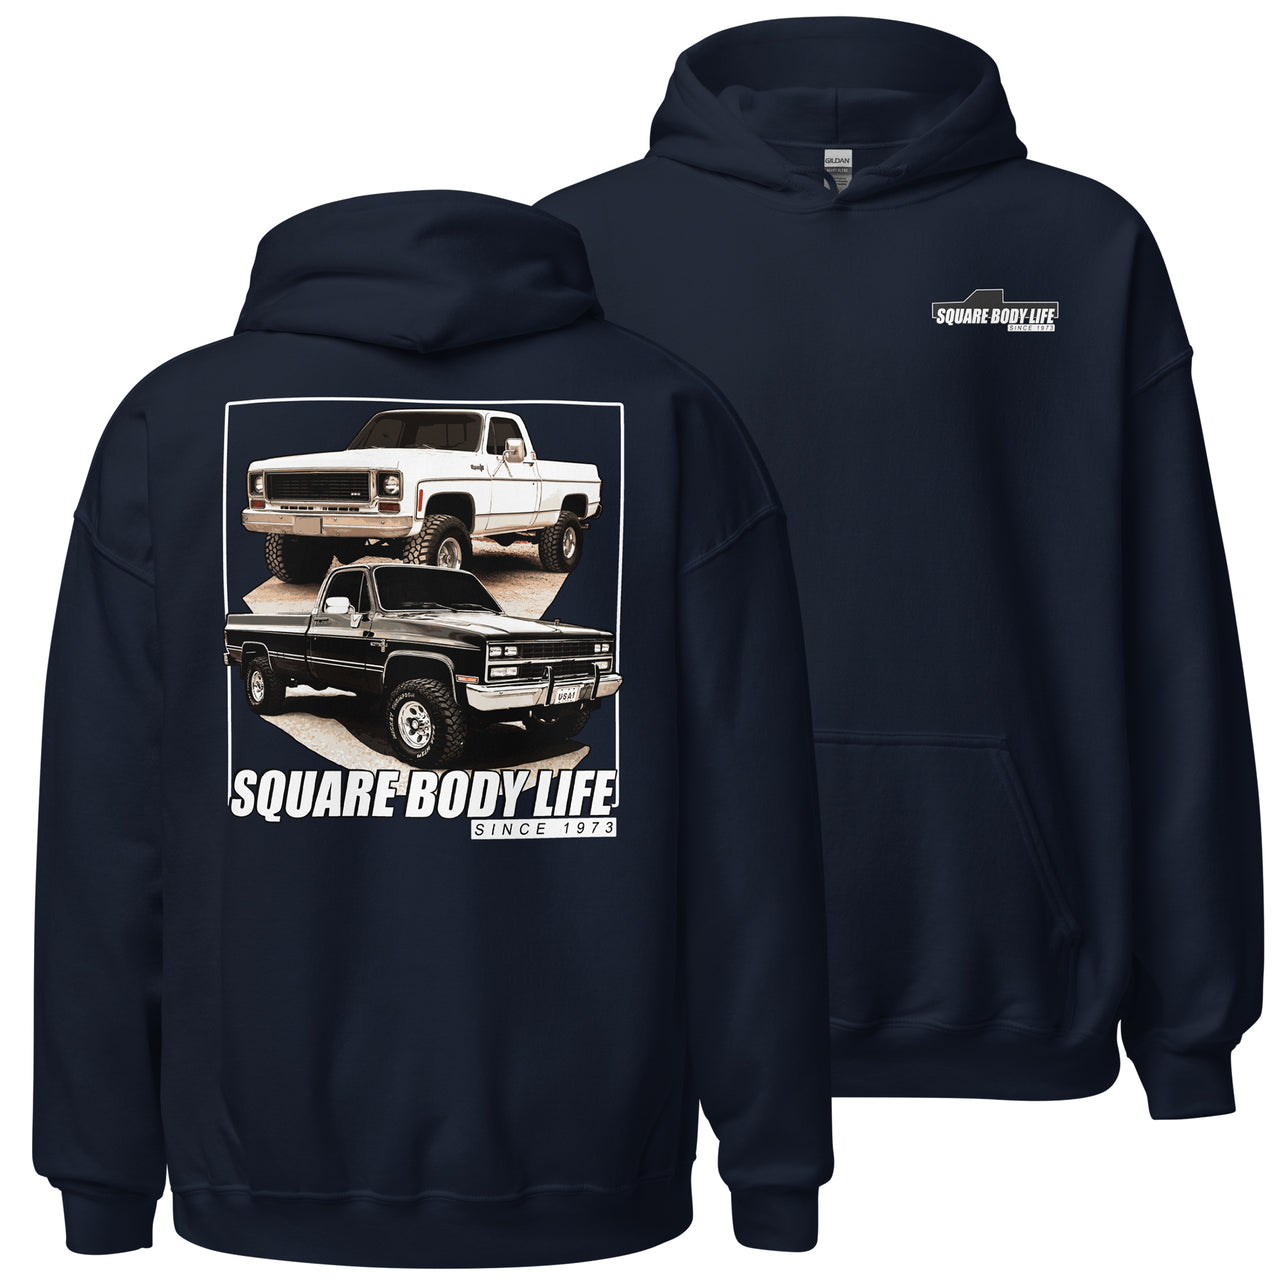 Square Body Life Hoodie in navy